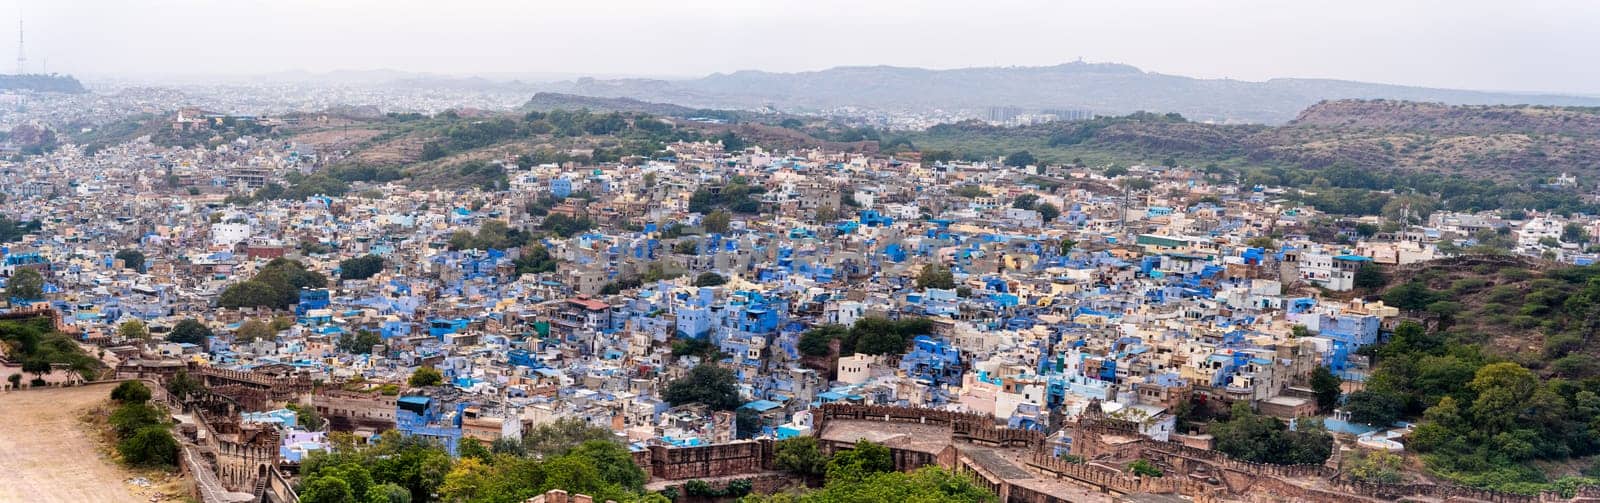 Panoramic aerial drone shot showing jodhpur blue city cityscape showing traditional houses in middle of aravalli with colorful densely packed houses by Shalinimathur